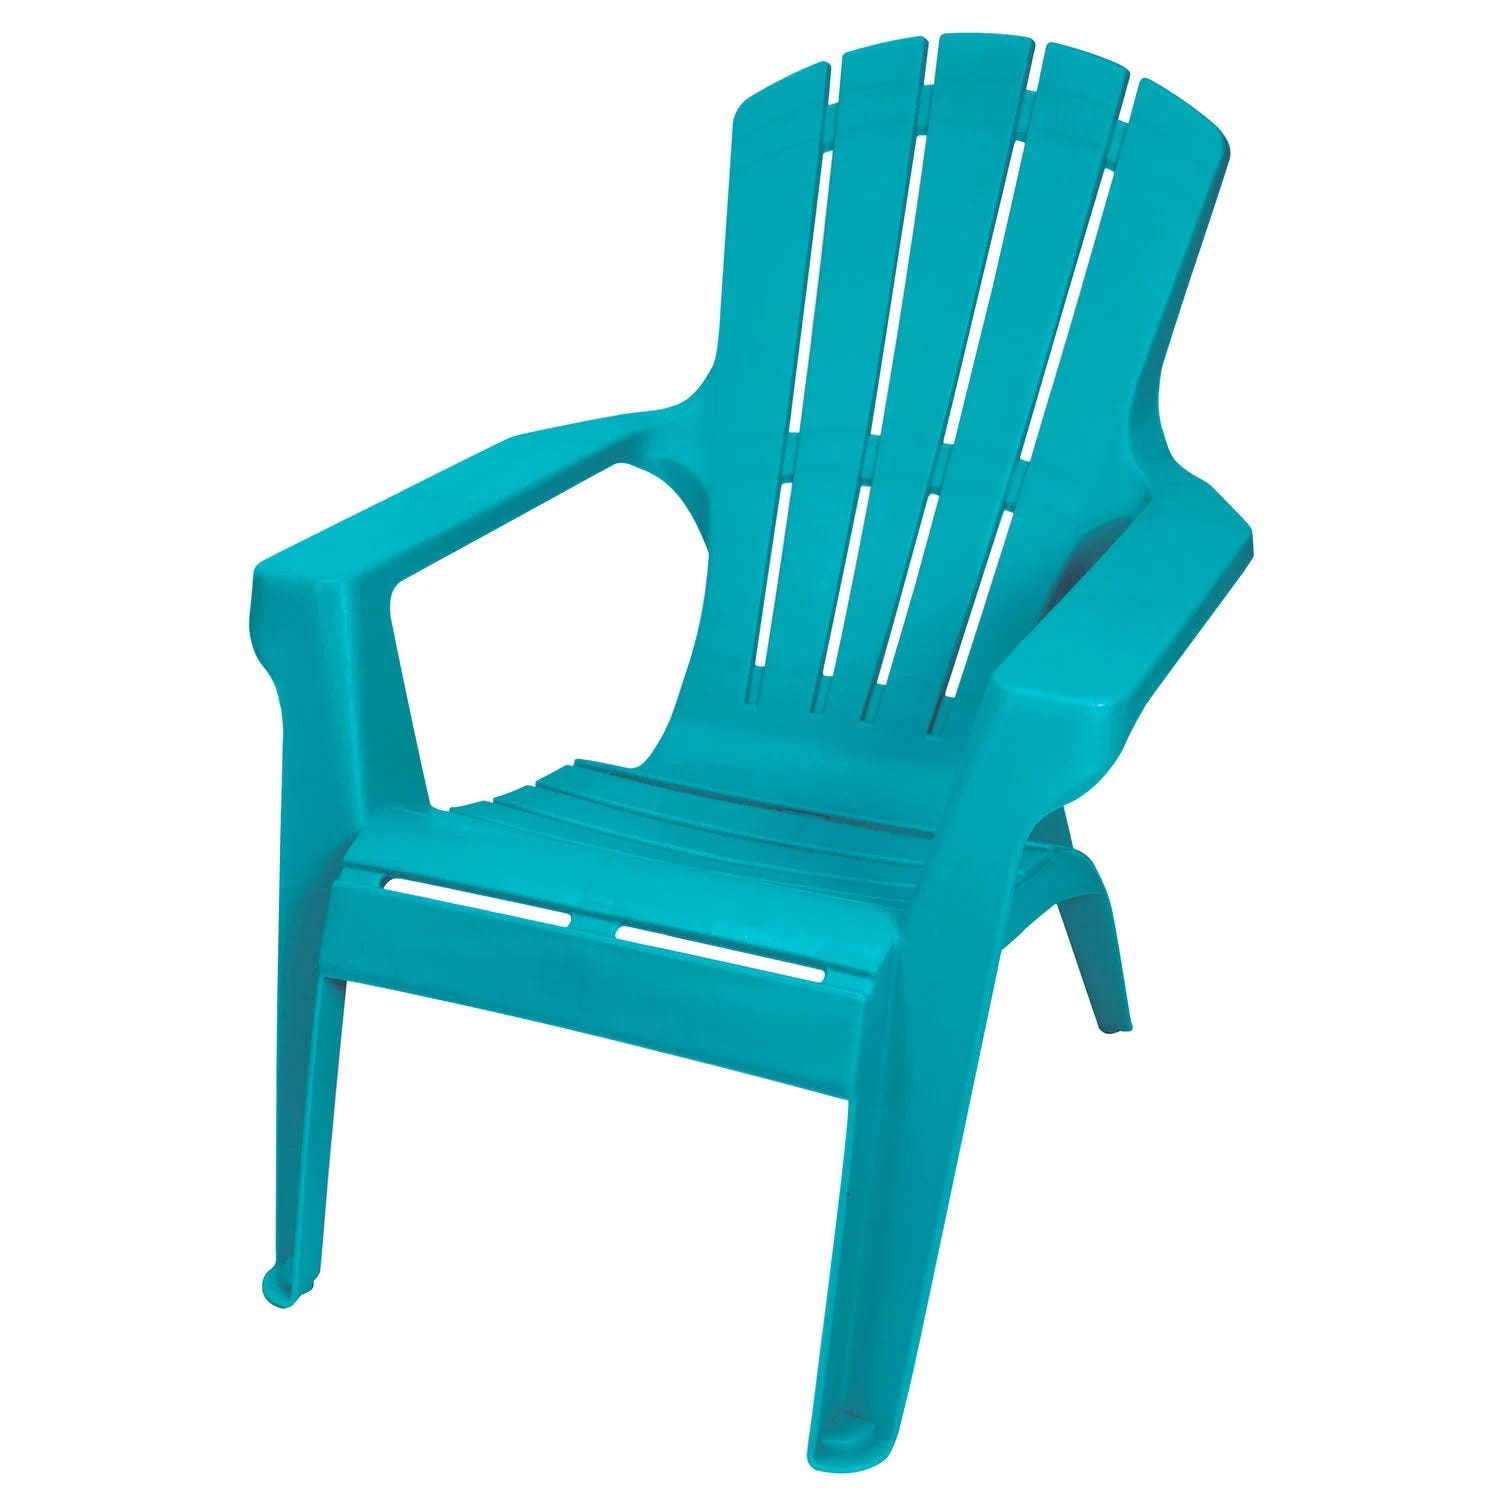 Intense Teal Adirondack II Stackable Chair for Outdoor Seating | Image